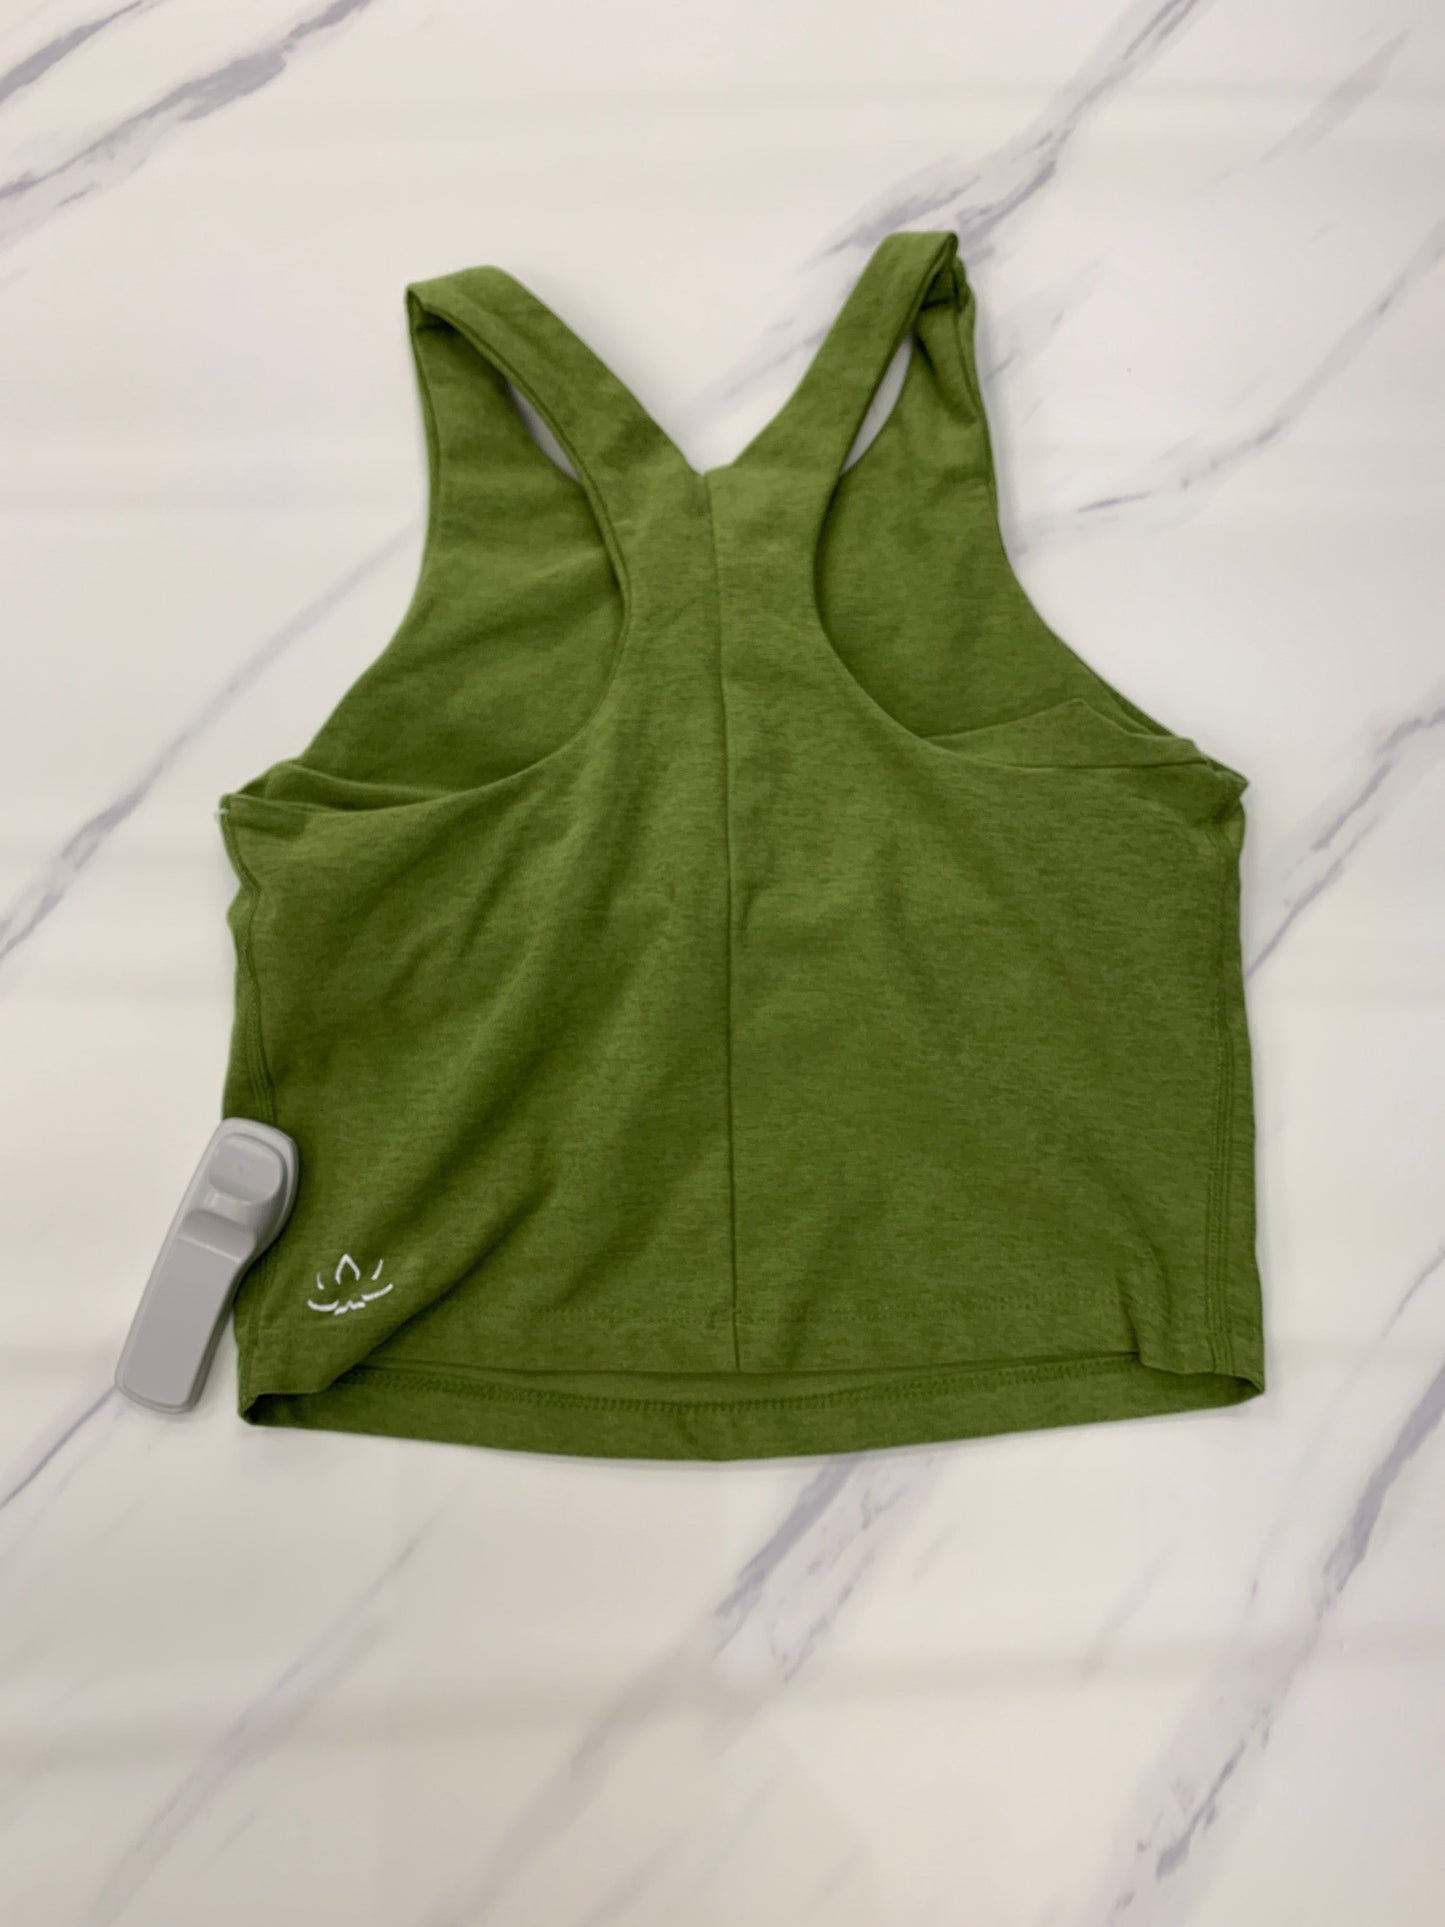 Green Athletic Tank Top Beyond Yoga, Size S